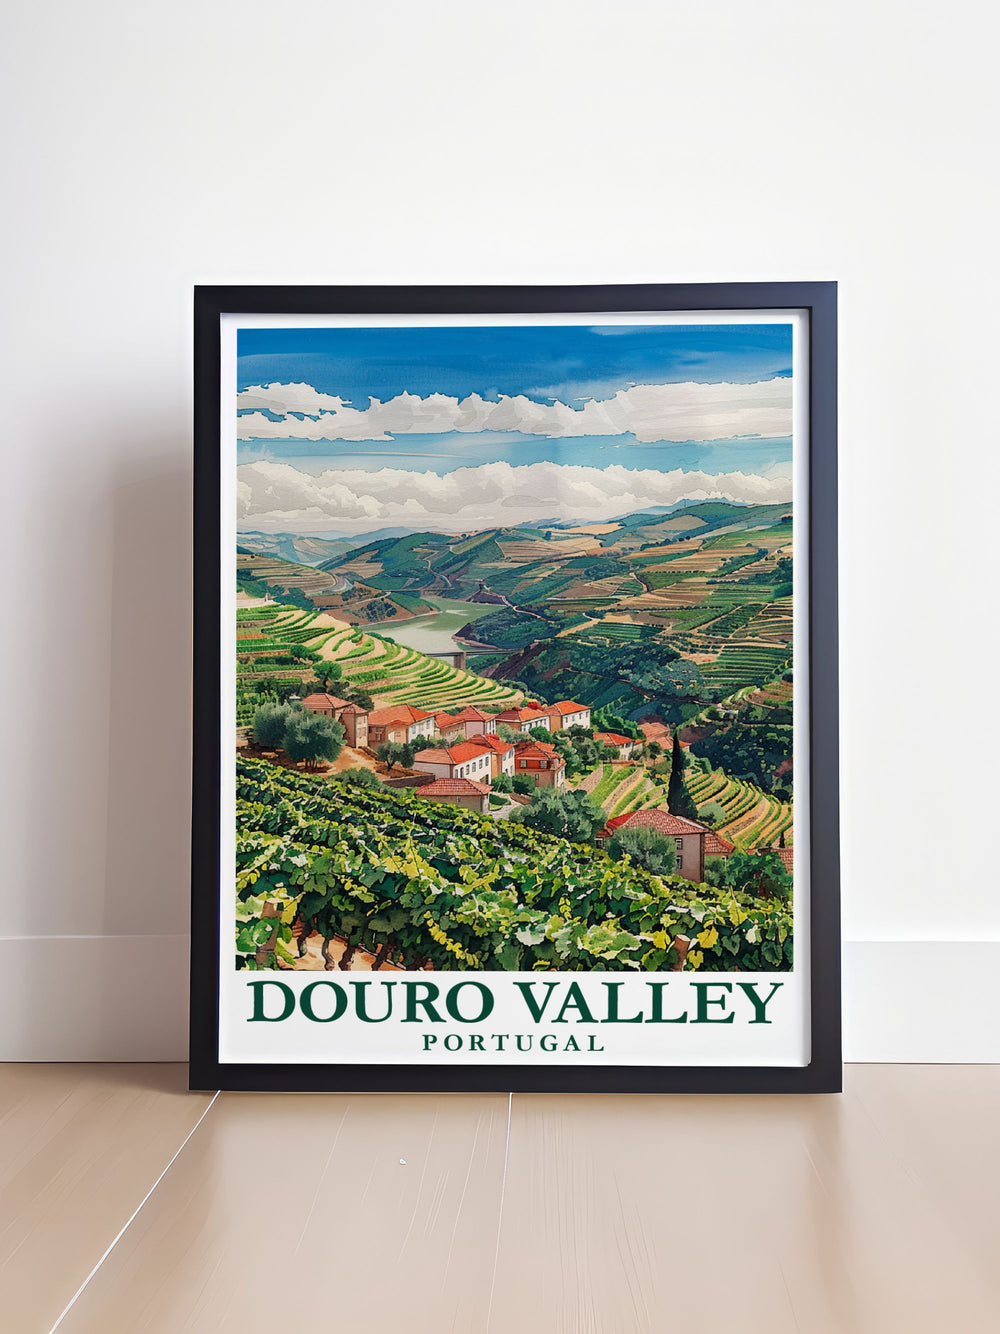 Modern wall decor showcasing the picturesque landscapes of the Douro Valley, perfect for bringing a sense of tranquility and nature into your home.